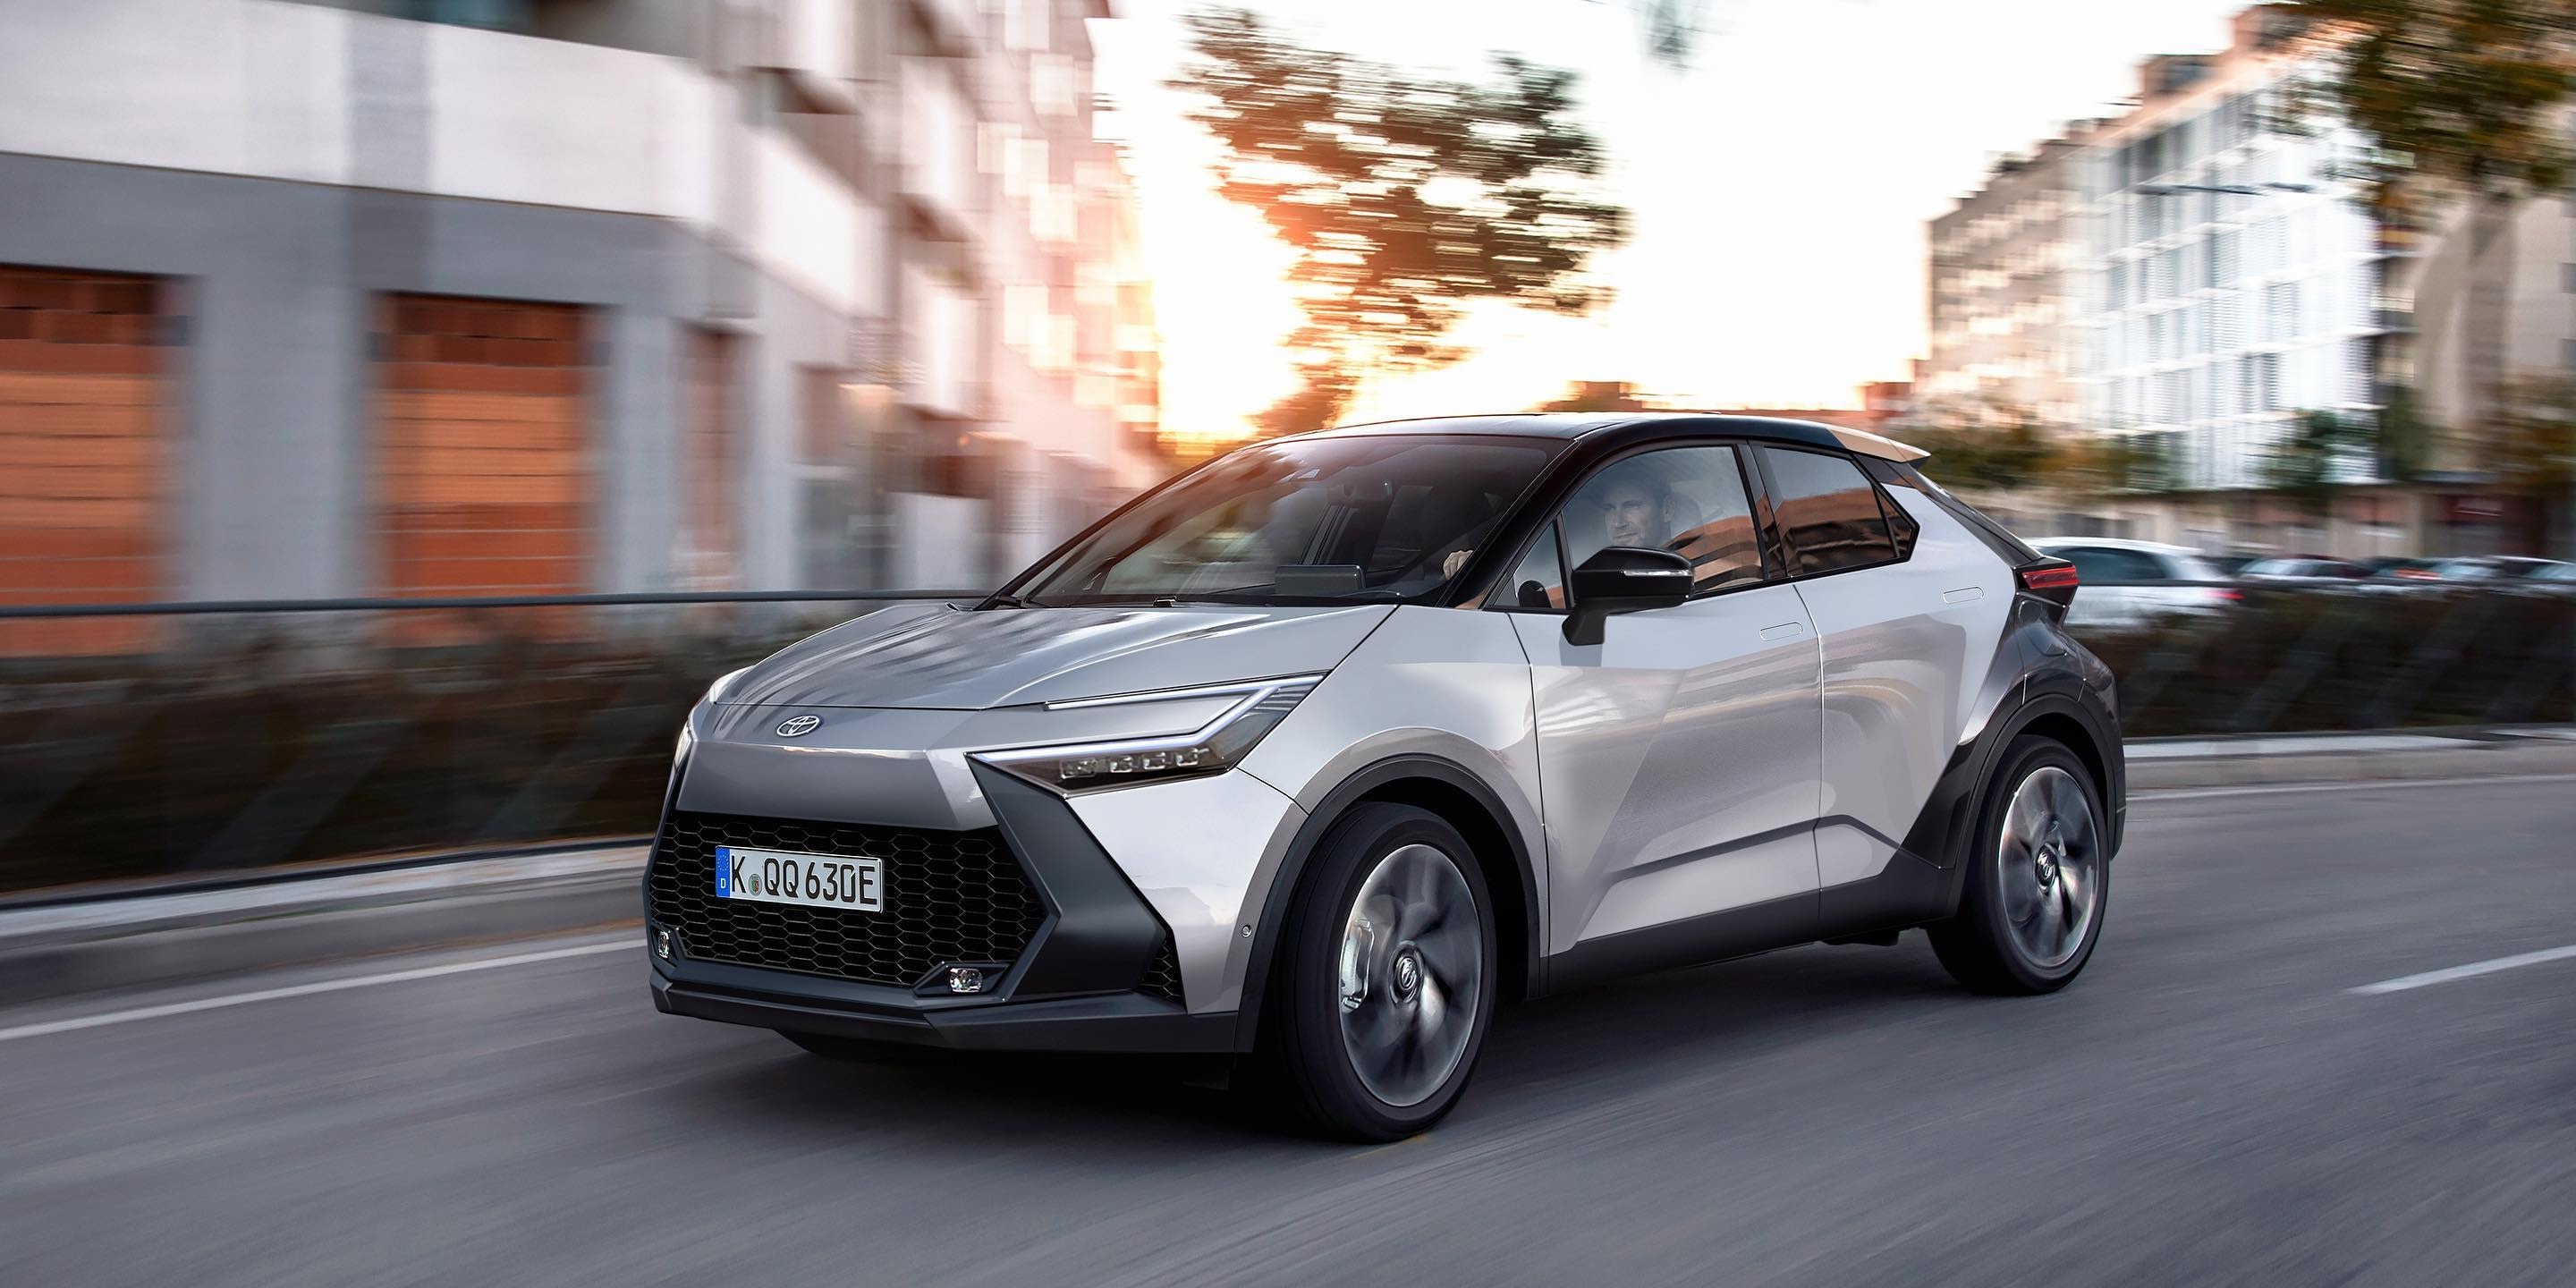 Toyota C-HR CUV, Agile, But Imperfect